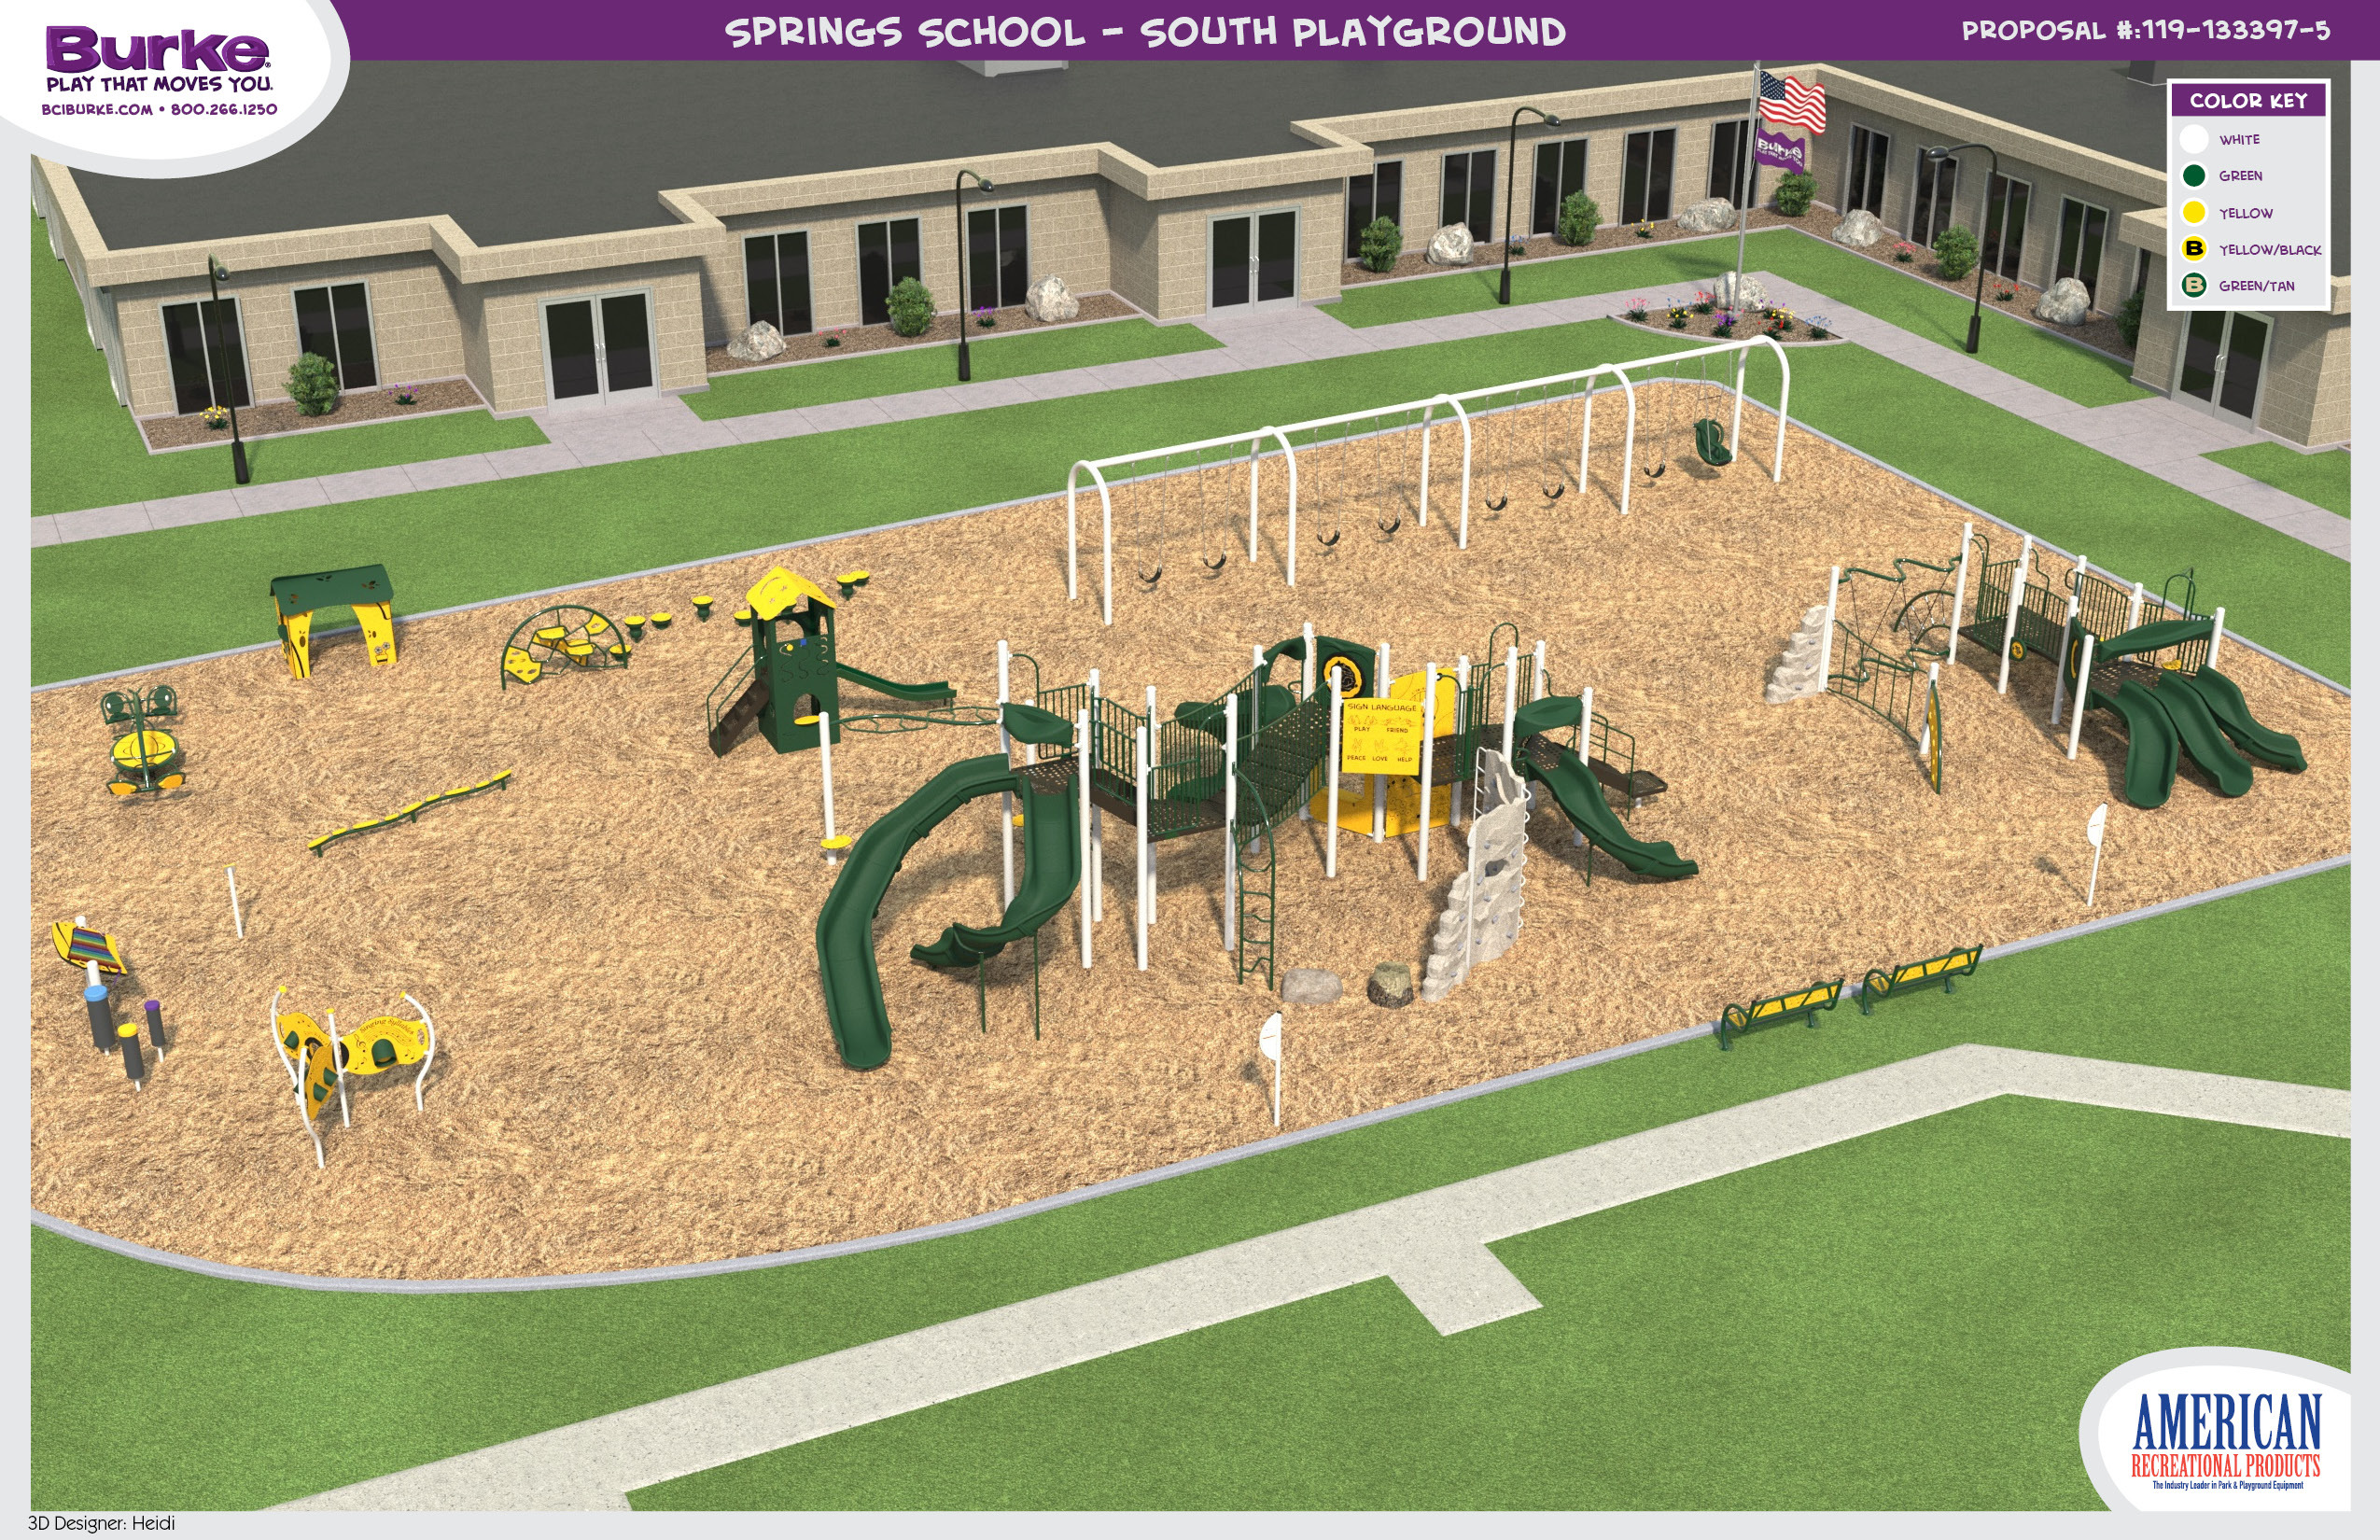 Renderings of the proposed Springs School south playground plan, which would be utilized by students in kindergarten through second grade. SPRINGS SCHOOL DISTRICT